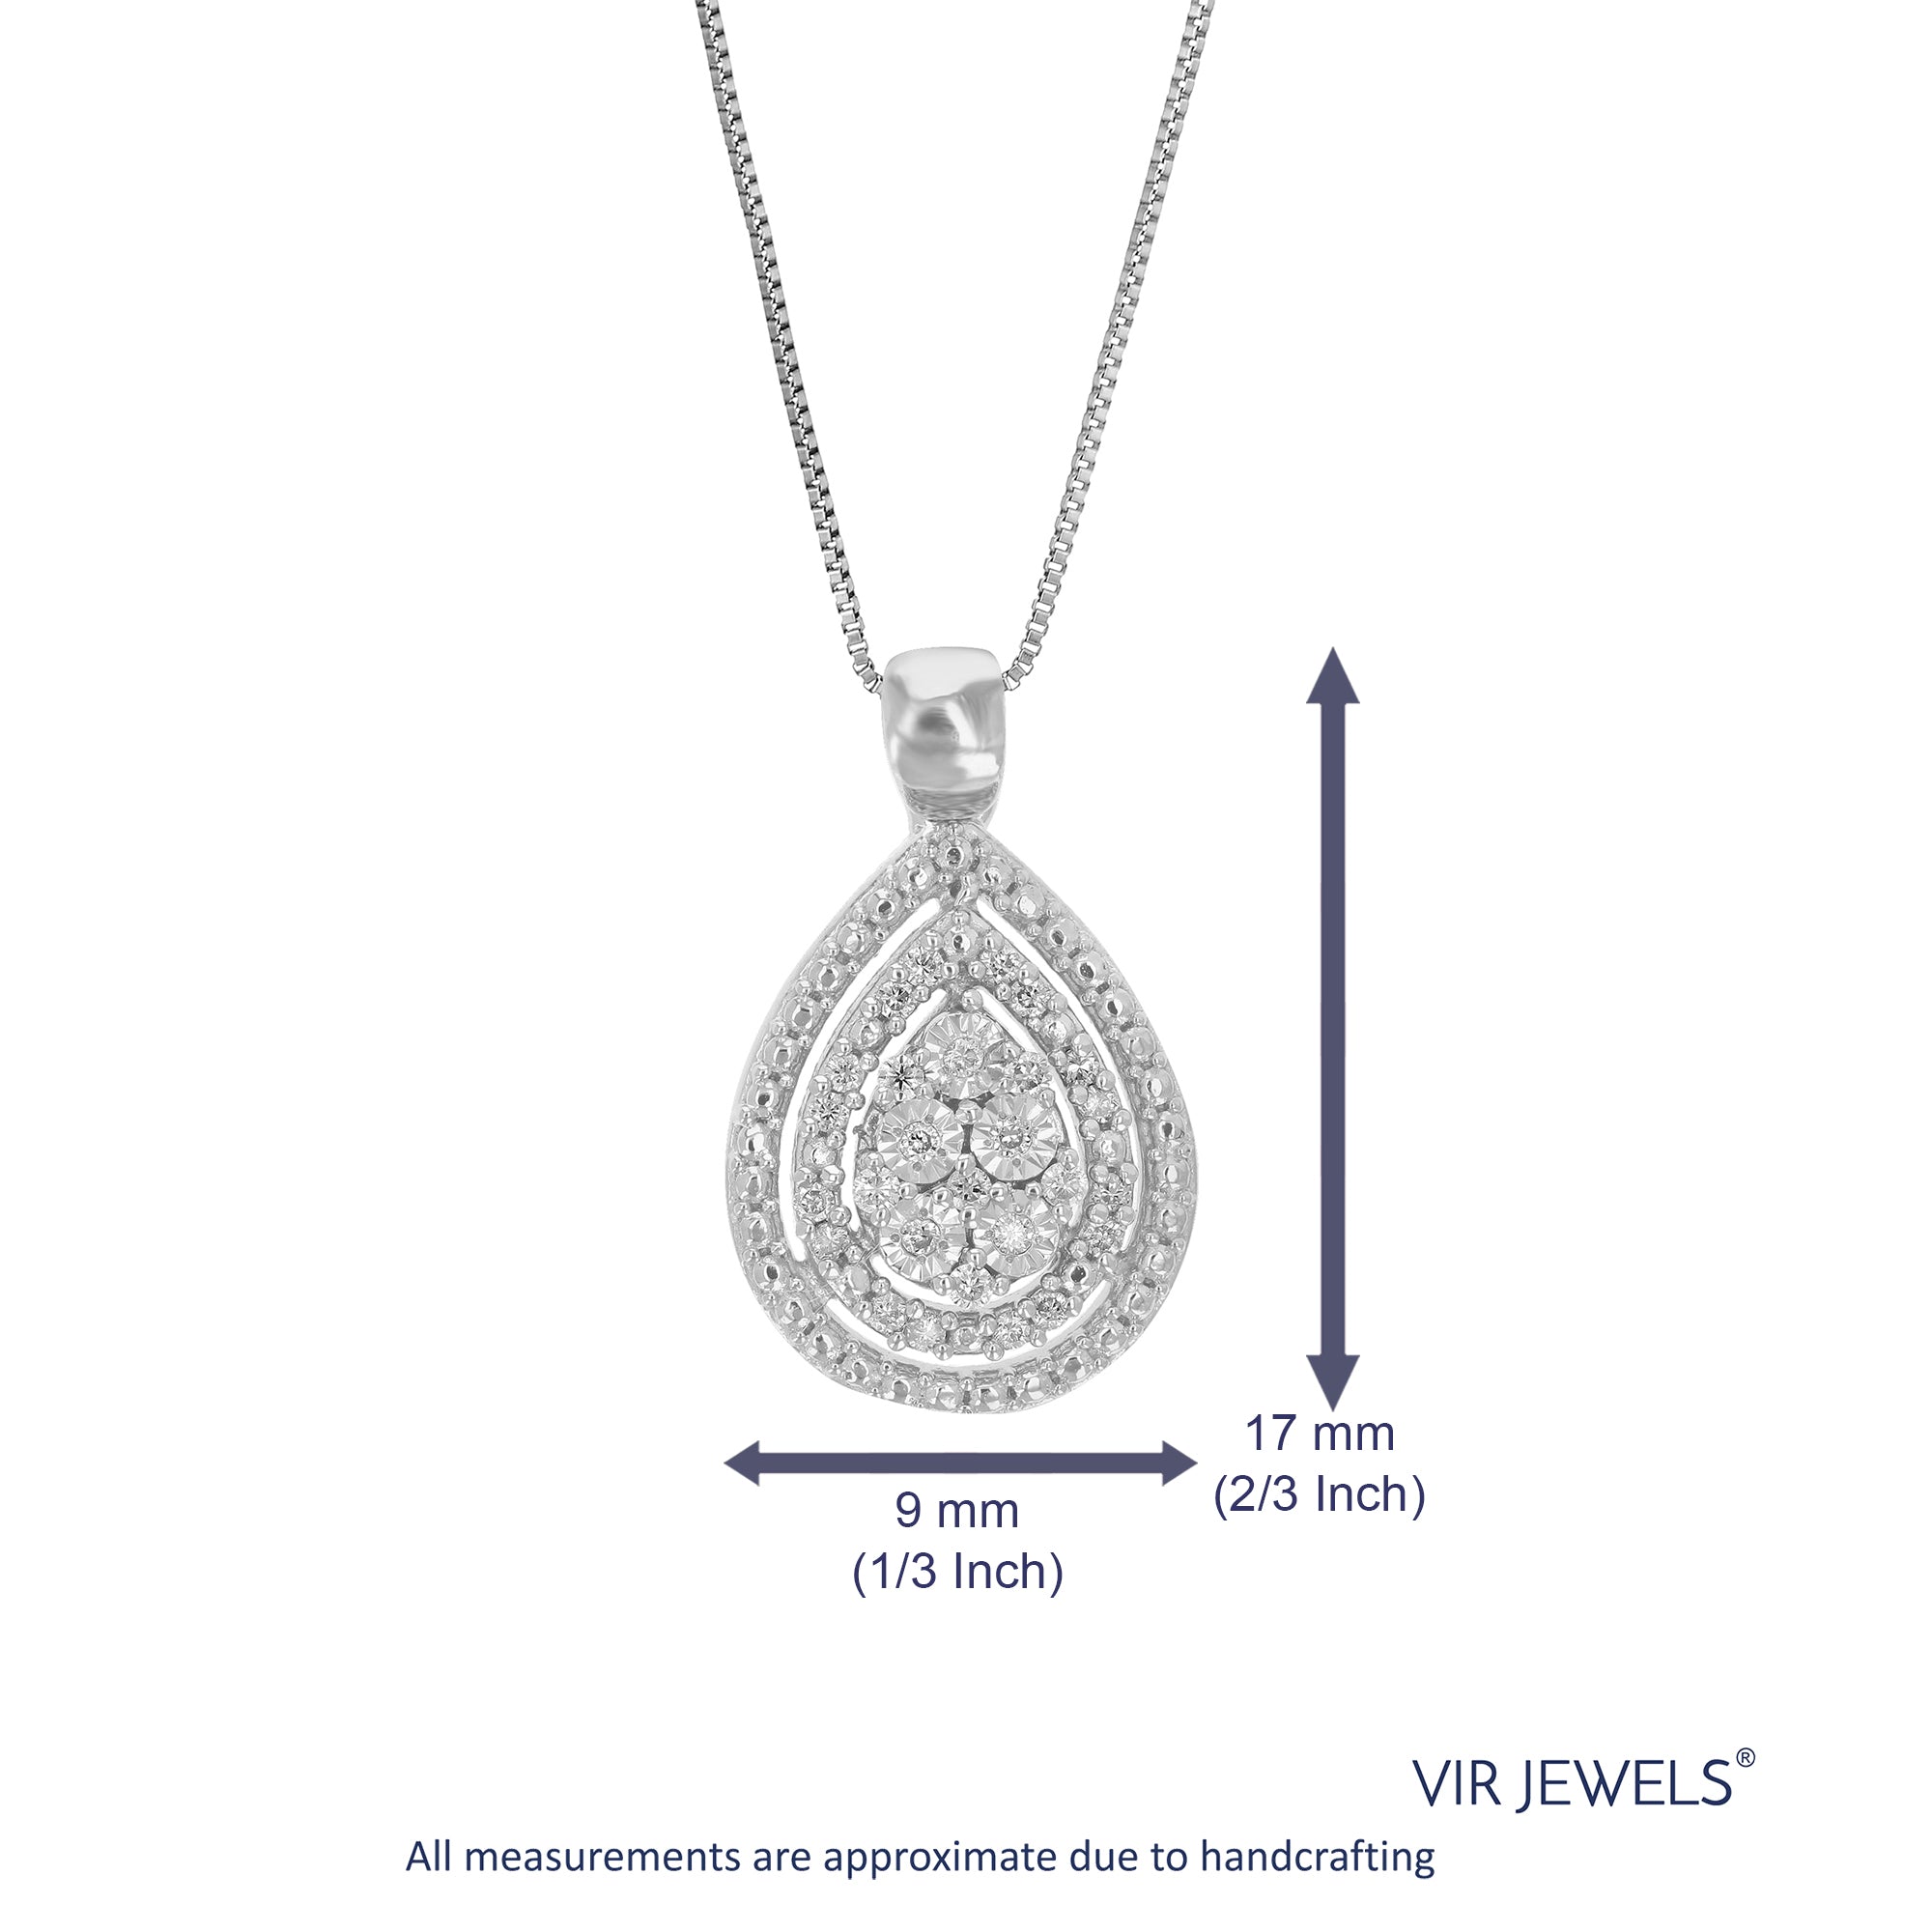 1/10 cttw Diamond Pendant Necklace for Women, Lab Grown Diamond Pear Shape Pendant Necklace in .925 Sterling Silver with Chain, Size 3/4 Inch